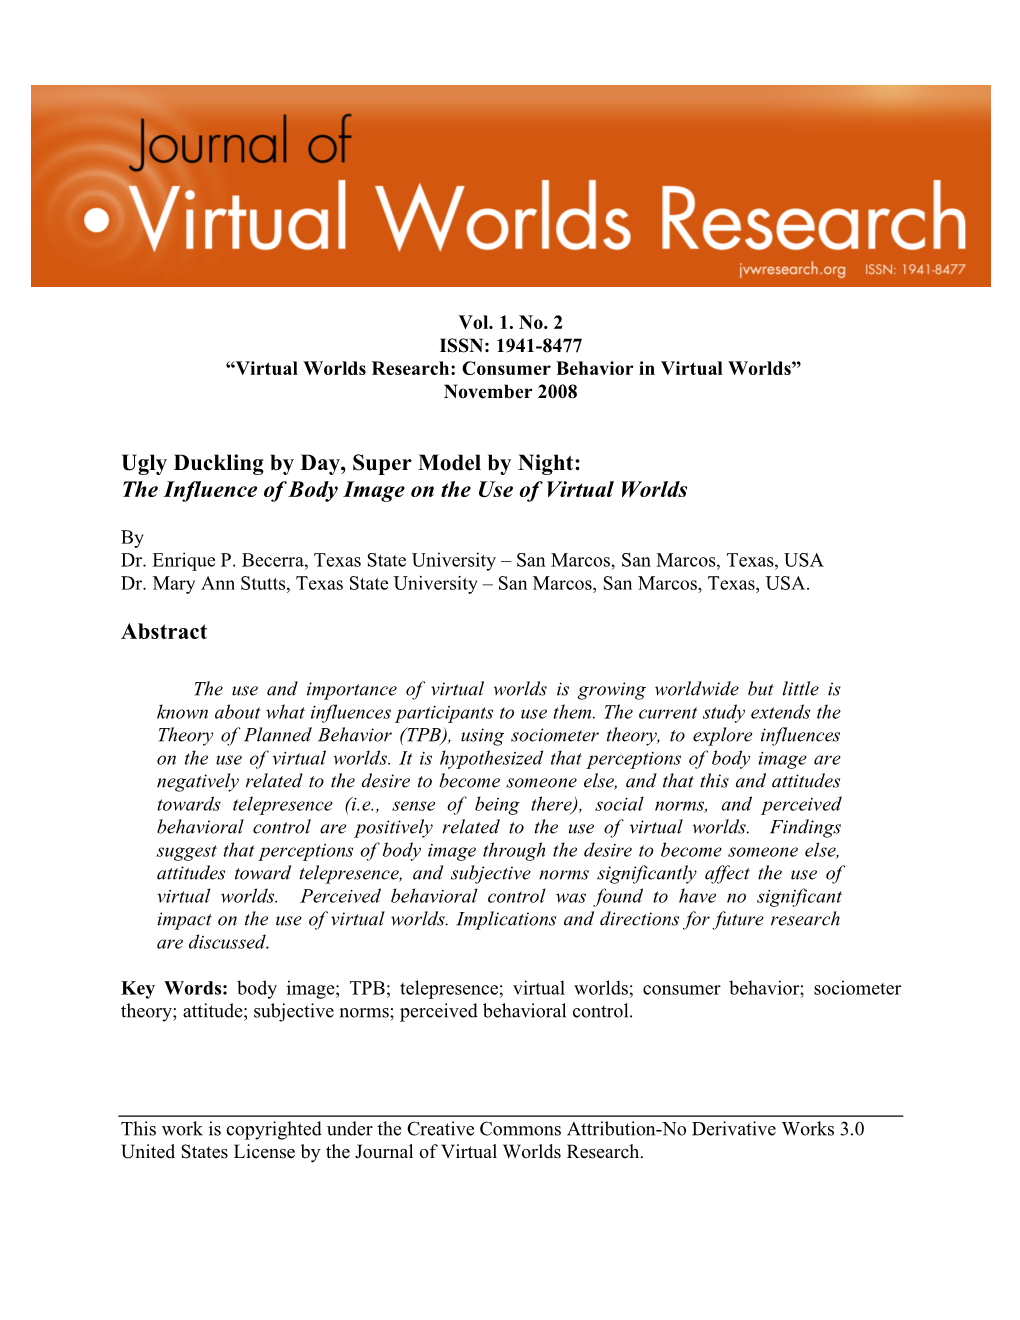 The Influence of Body Image on the Use of Virtual Worlds Abstract